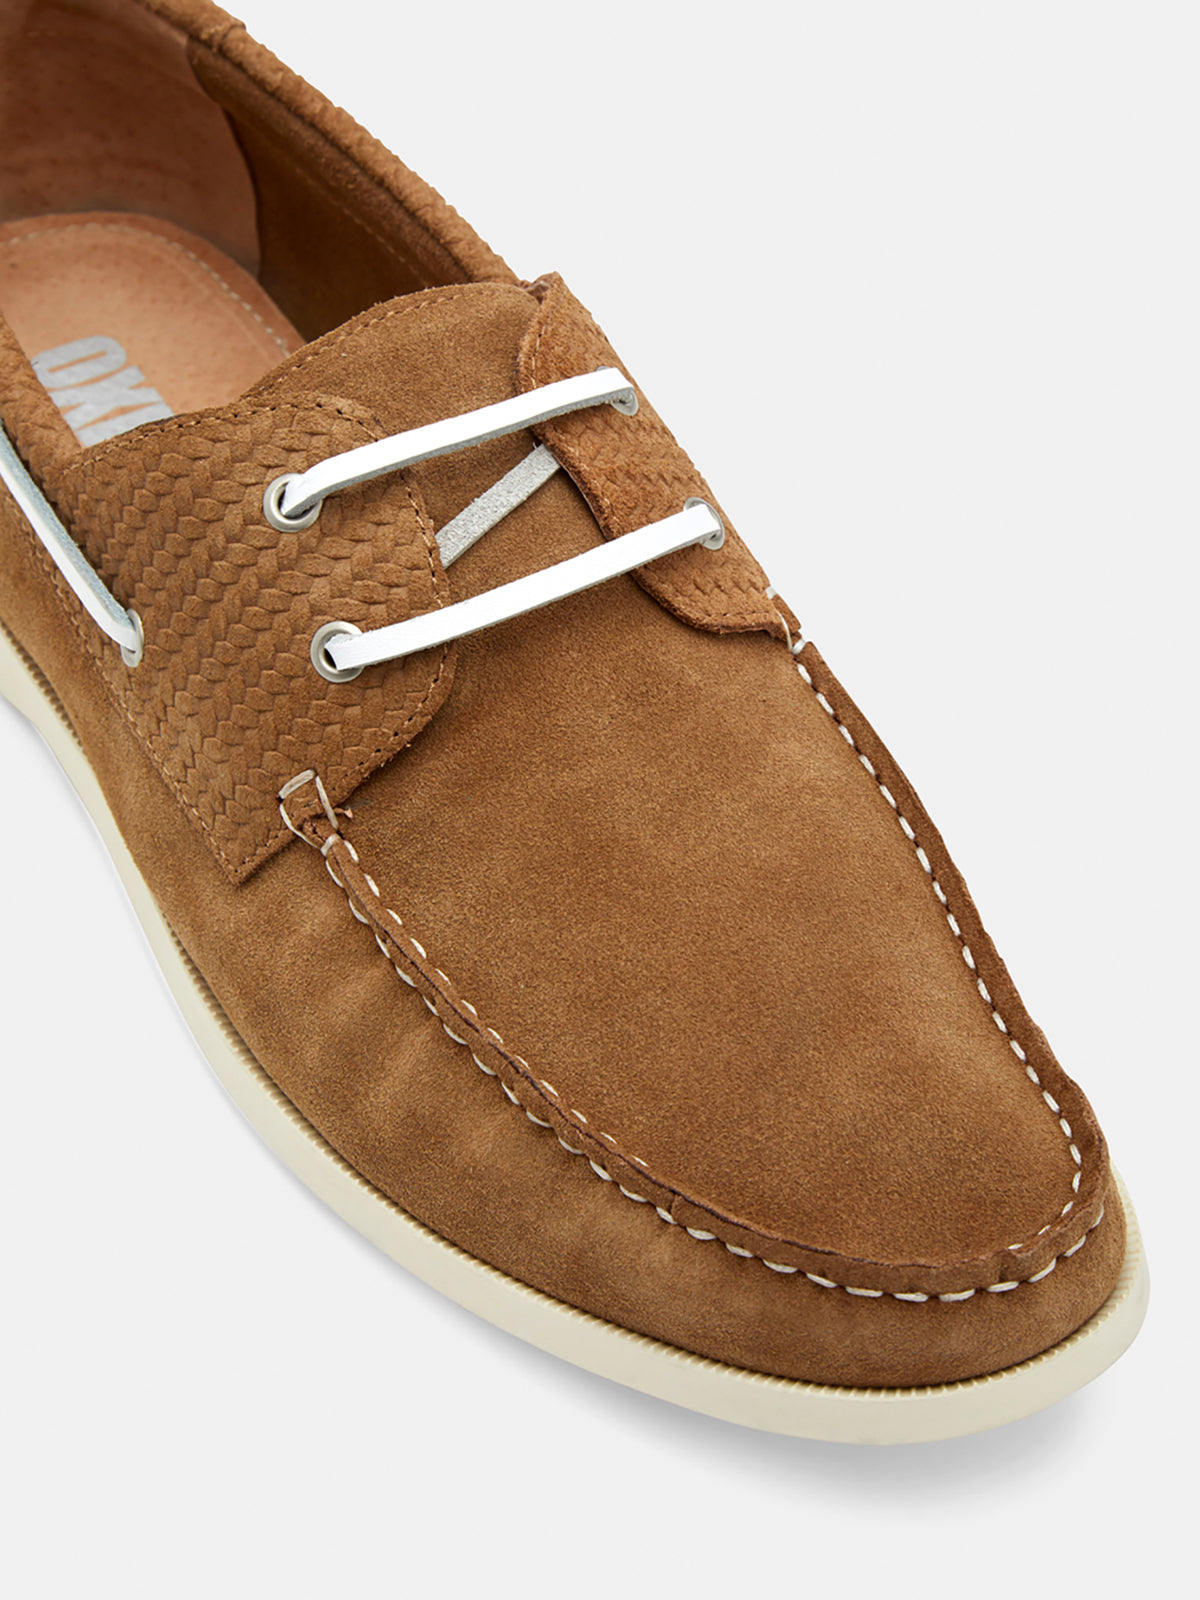 ADAM SUEDE BOATER MENS SHOES